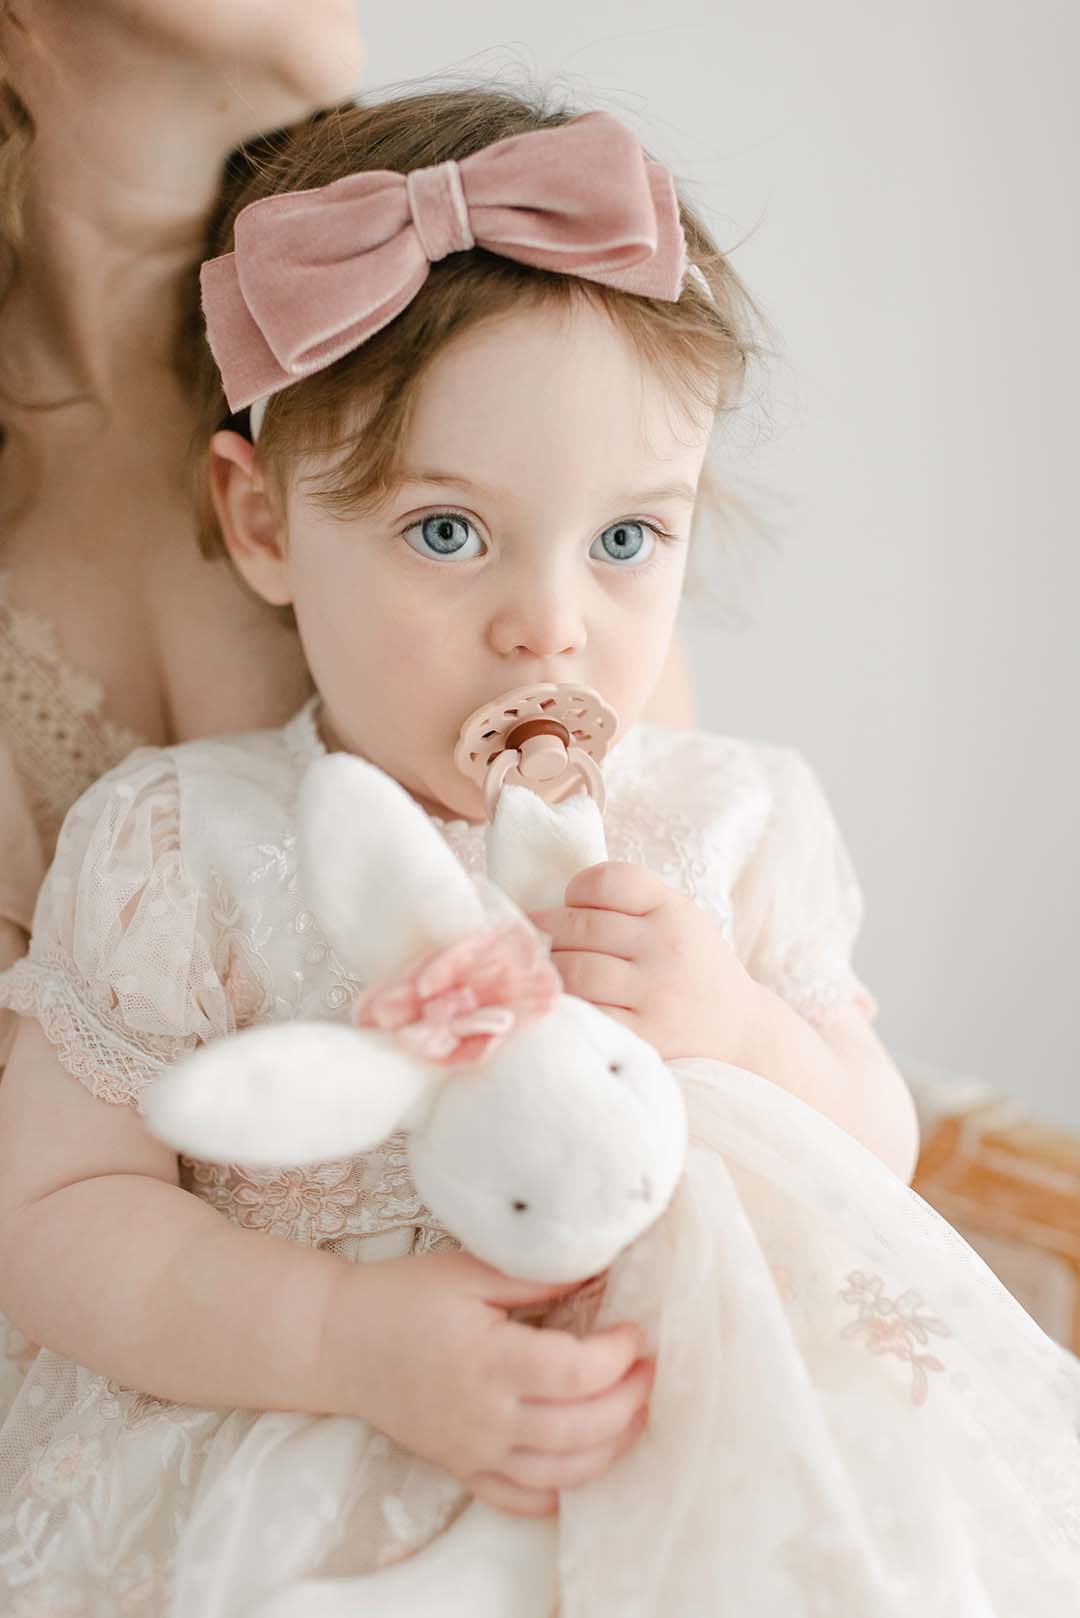 A toddler girl with blue eyes holds a white Elizabeth Silly Bunny Buddy and sucks on a pacifier. She wears an heirloom lace dress and a pink bow headband, partially held by an adult whose face is.